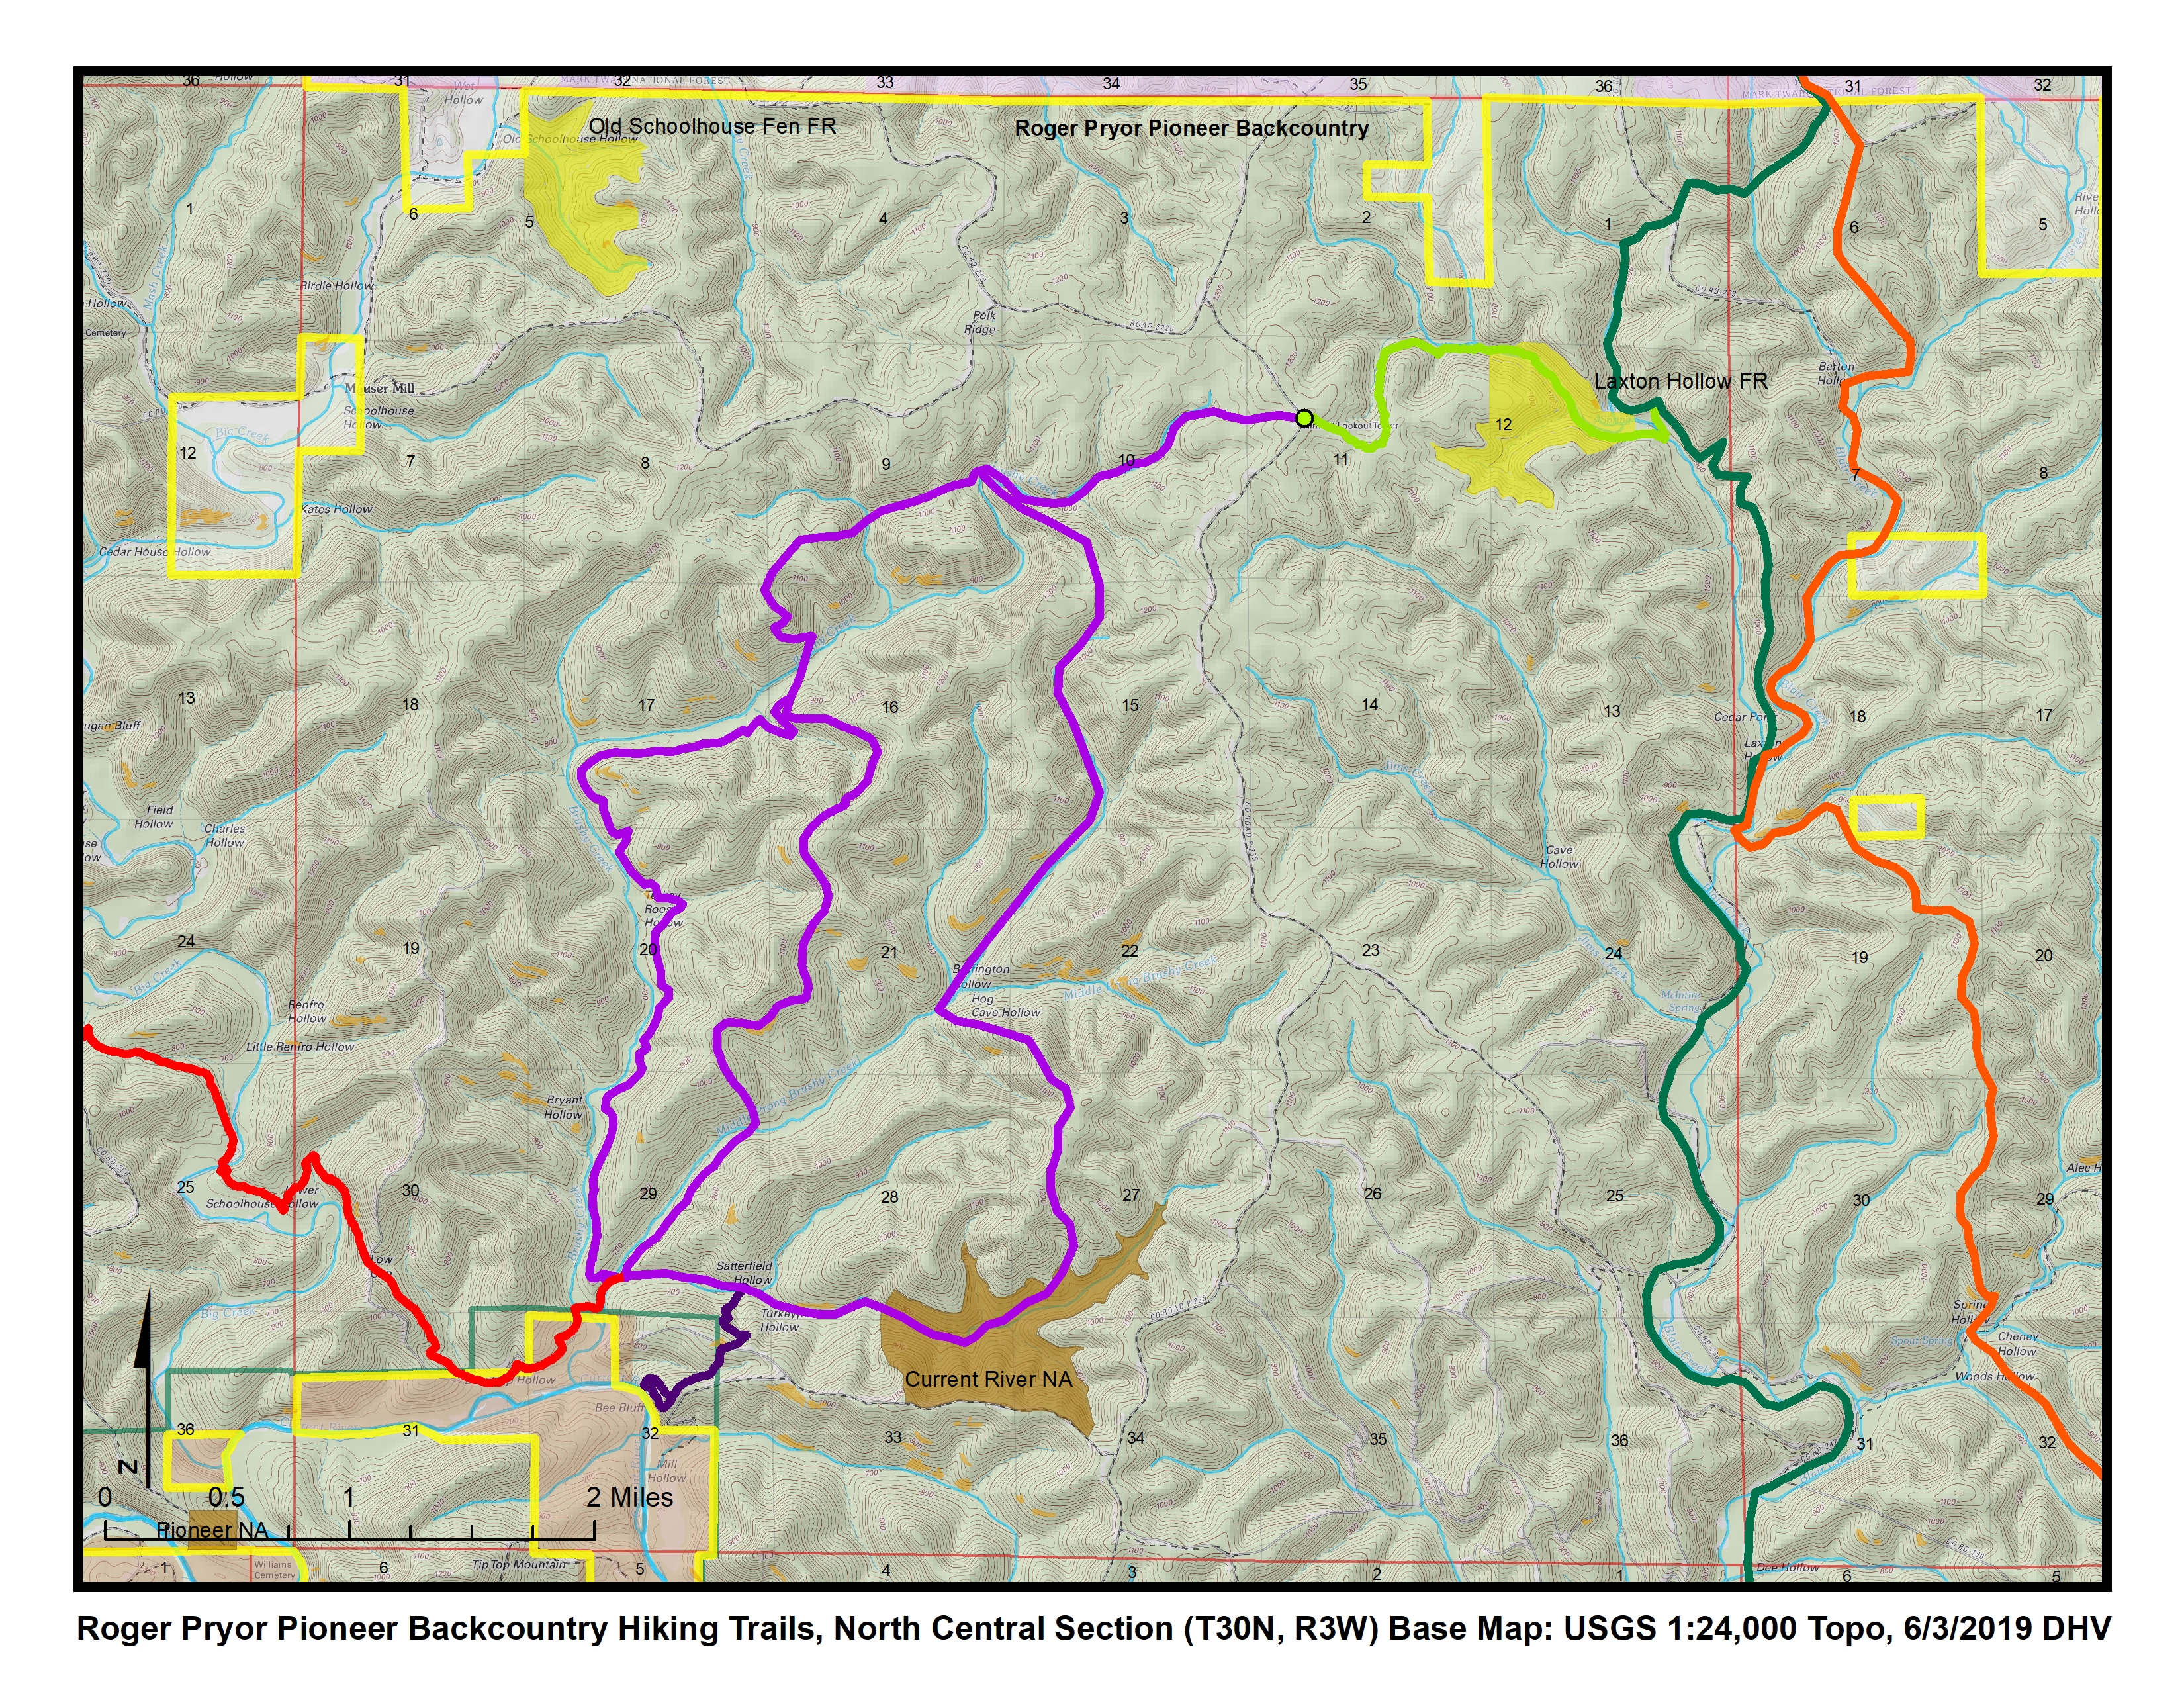 Map of north central section of Pioneer Backcountry trails